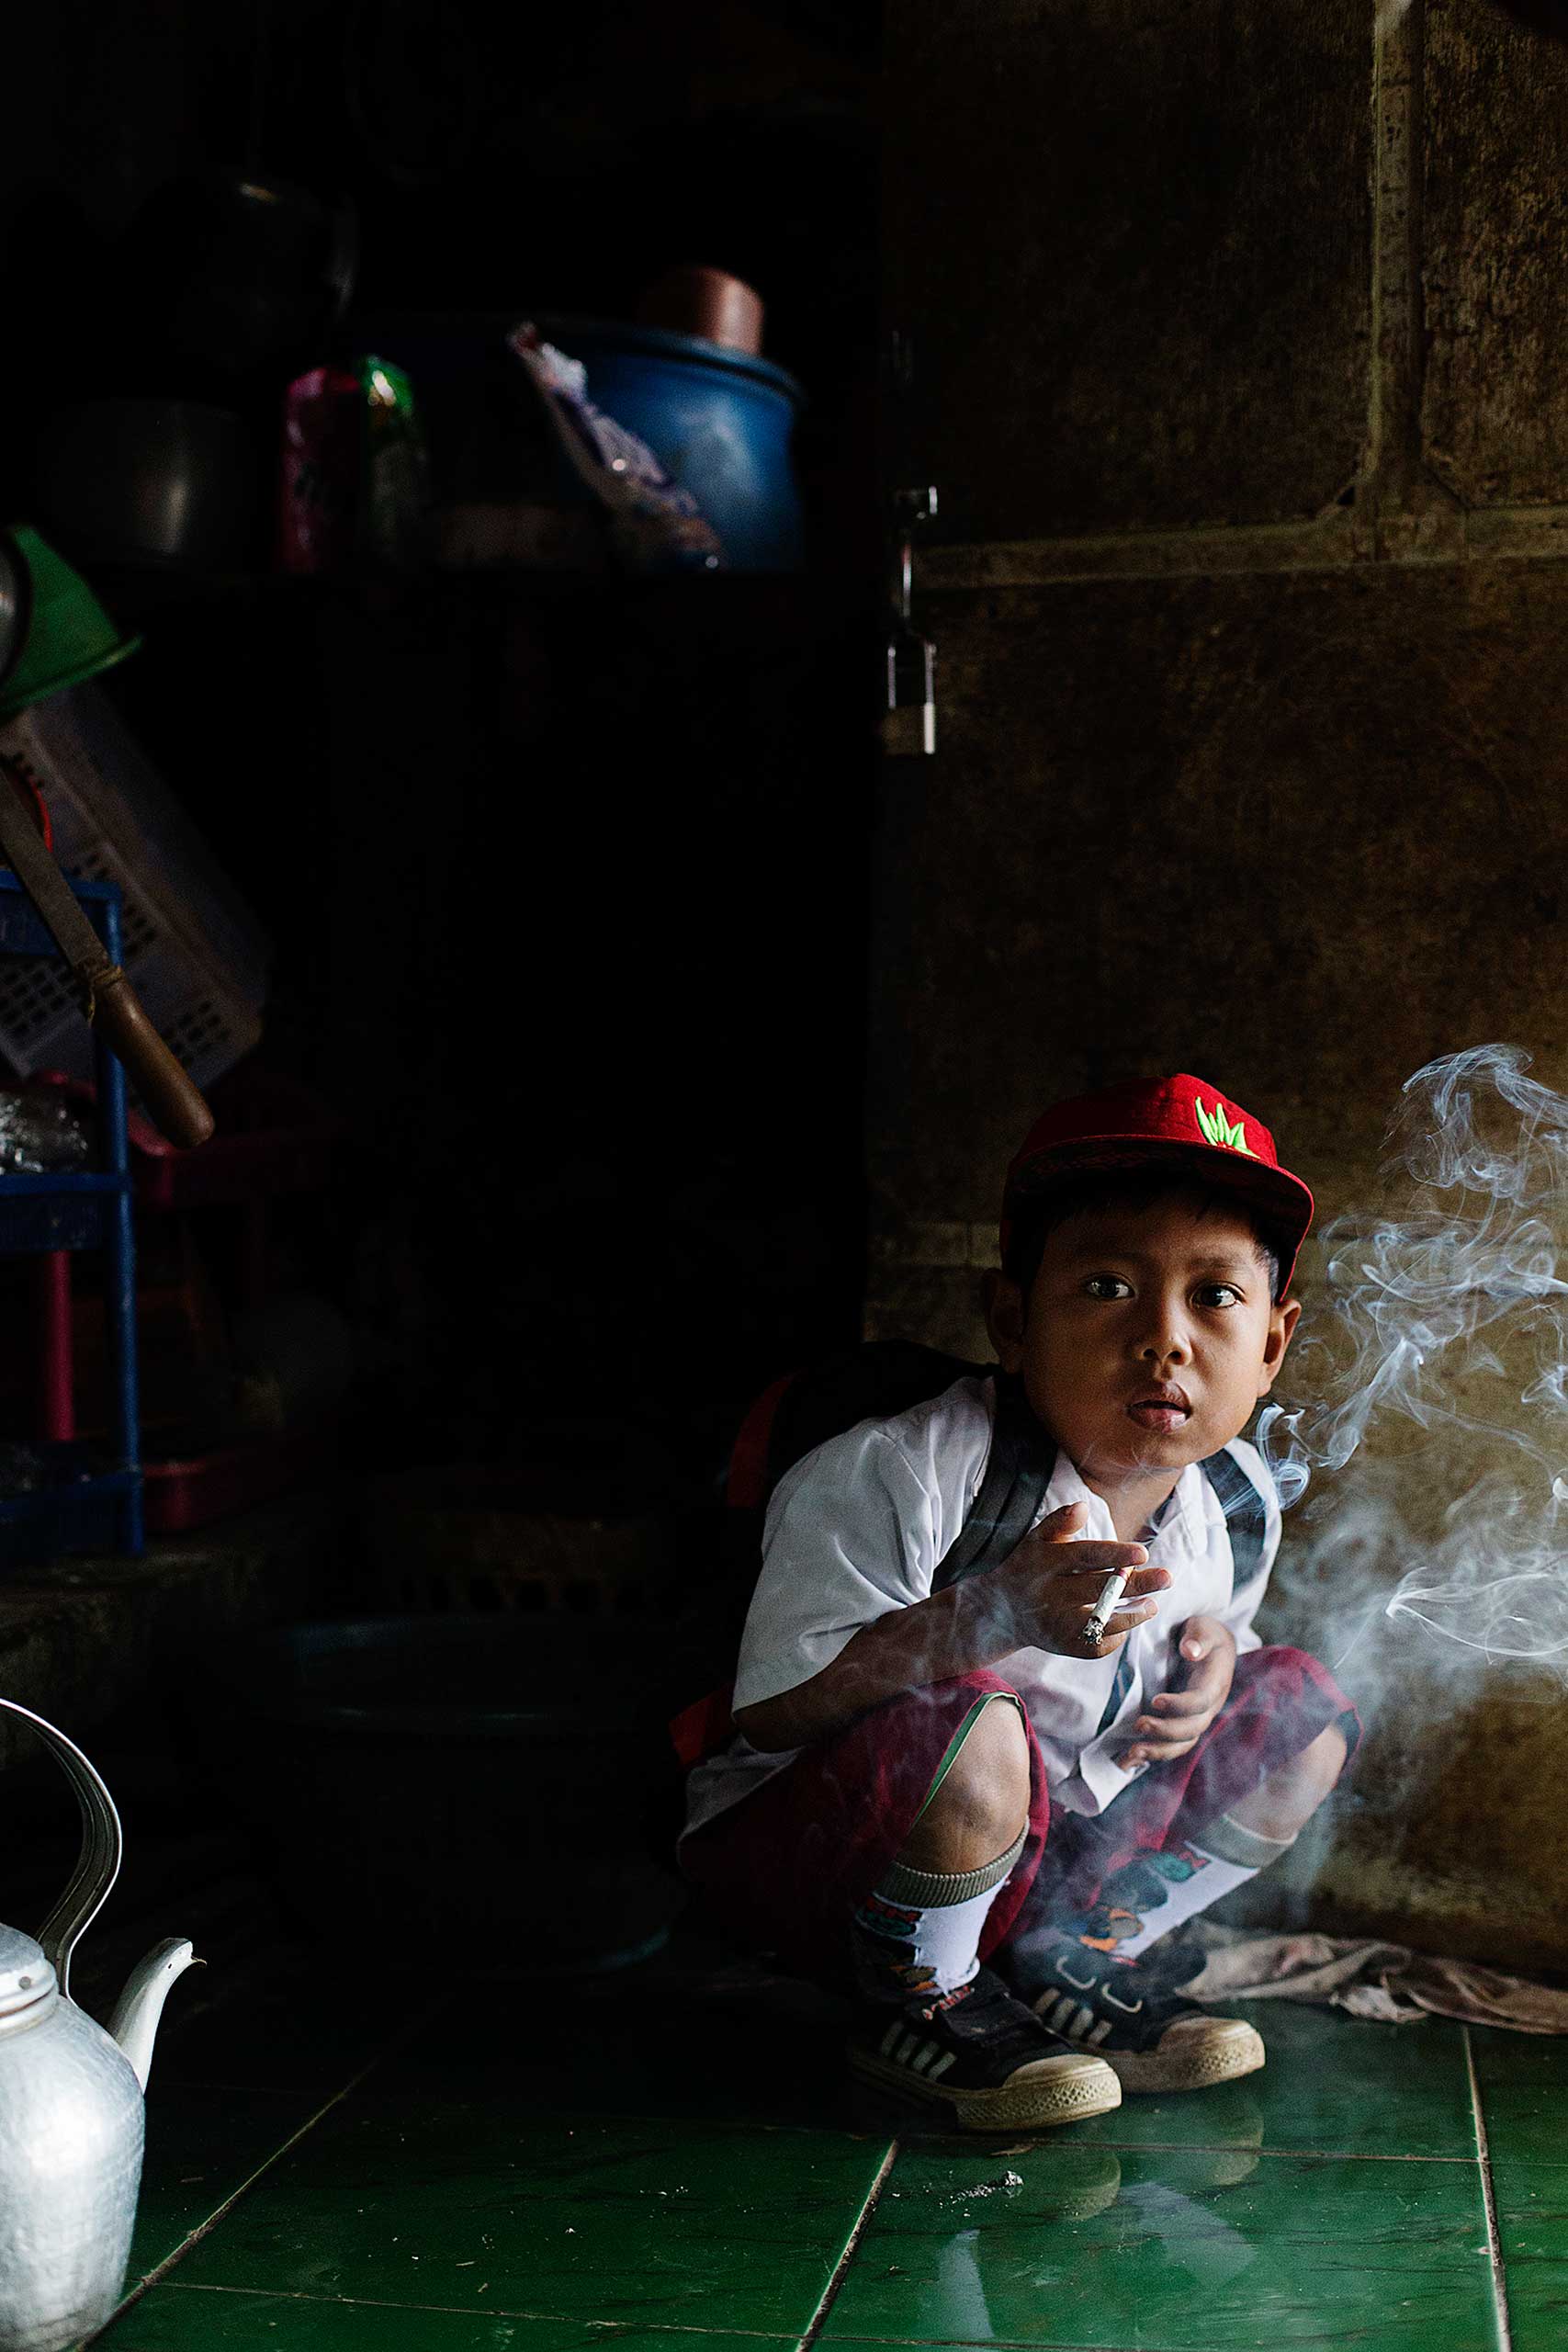 Dihan Muhamad has his first cigarette at 7AM at his home before he attends his first grade class in his village near the town of Garut, Indonesia on February 10, 2014.